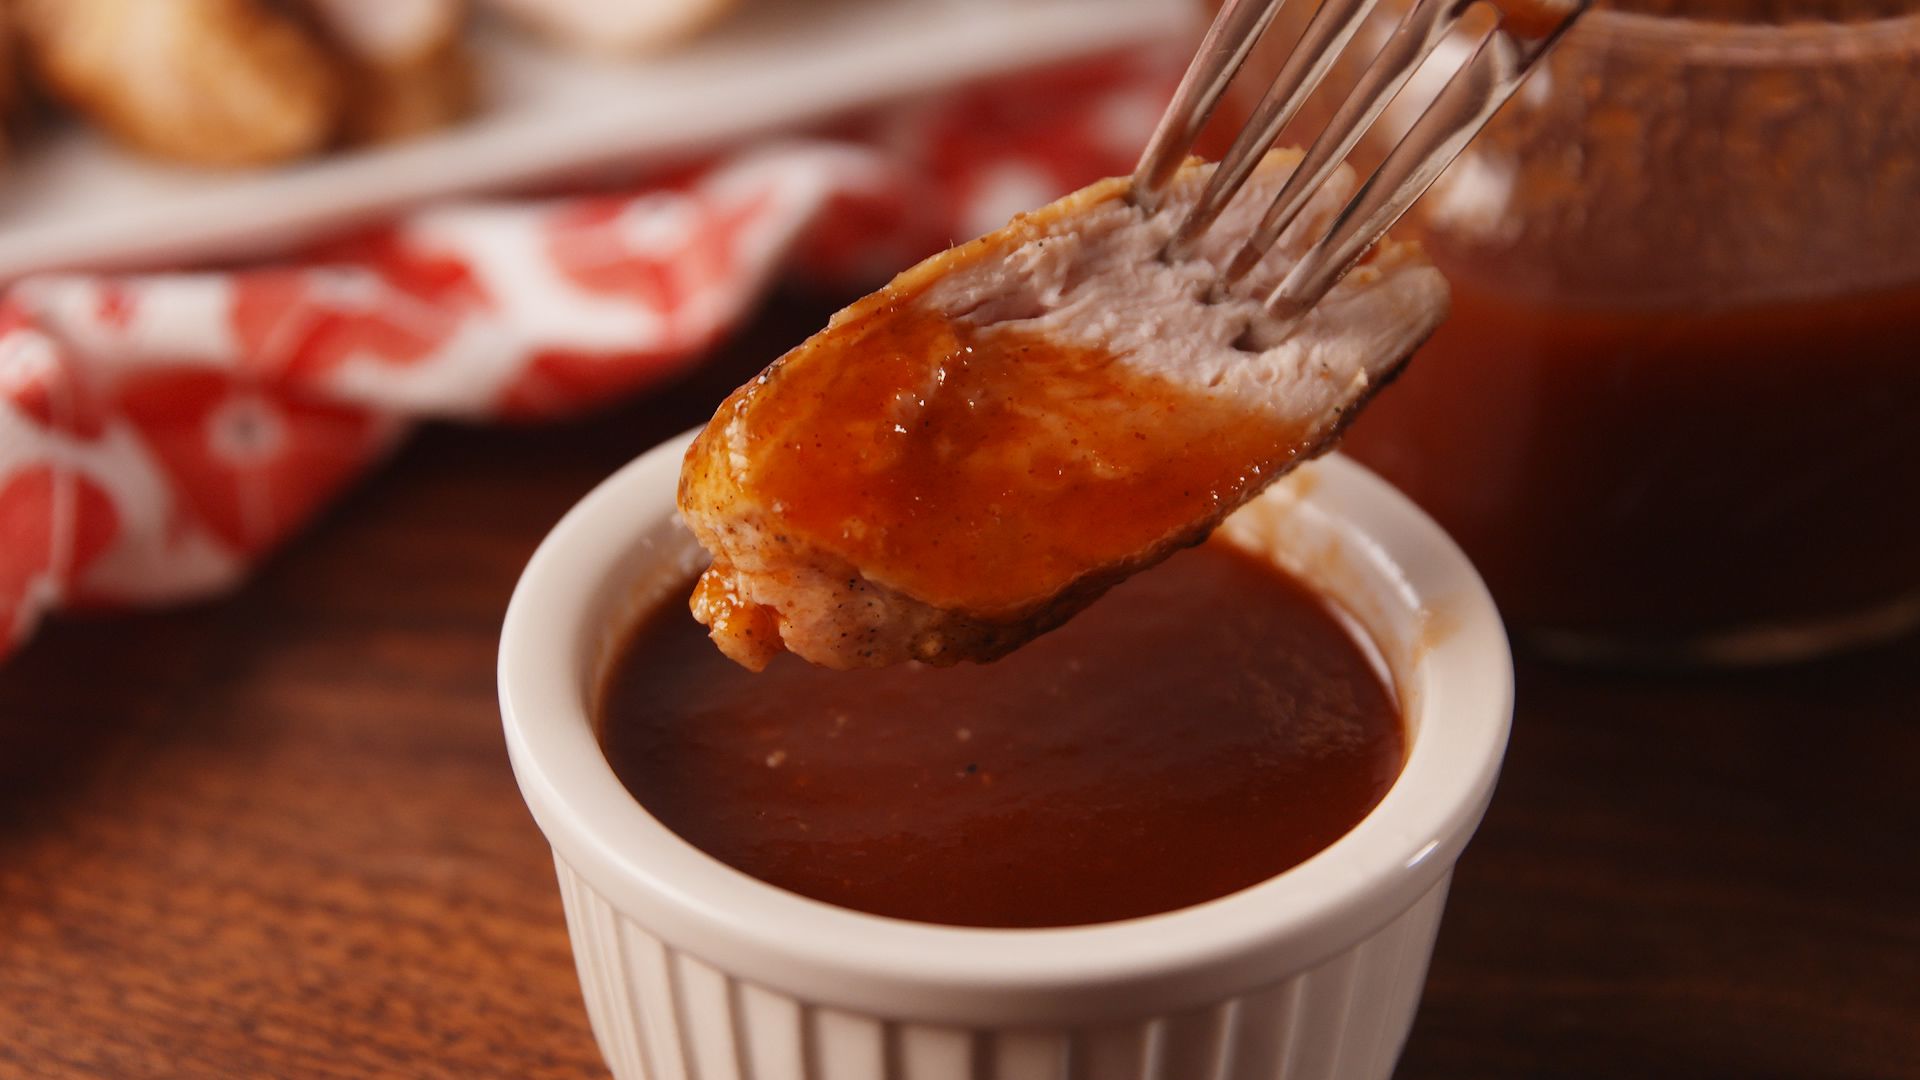 If You've Tried 18 of Condiments & Sauces, You're Real … Quiz Barbecue Sauce